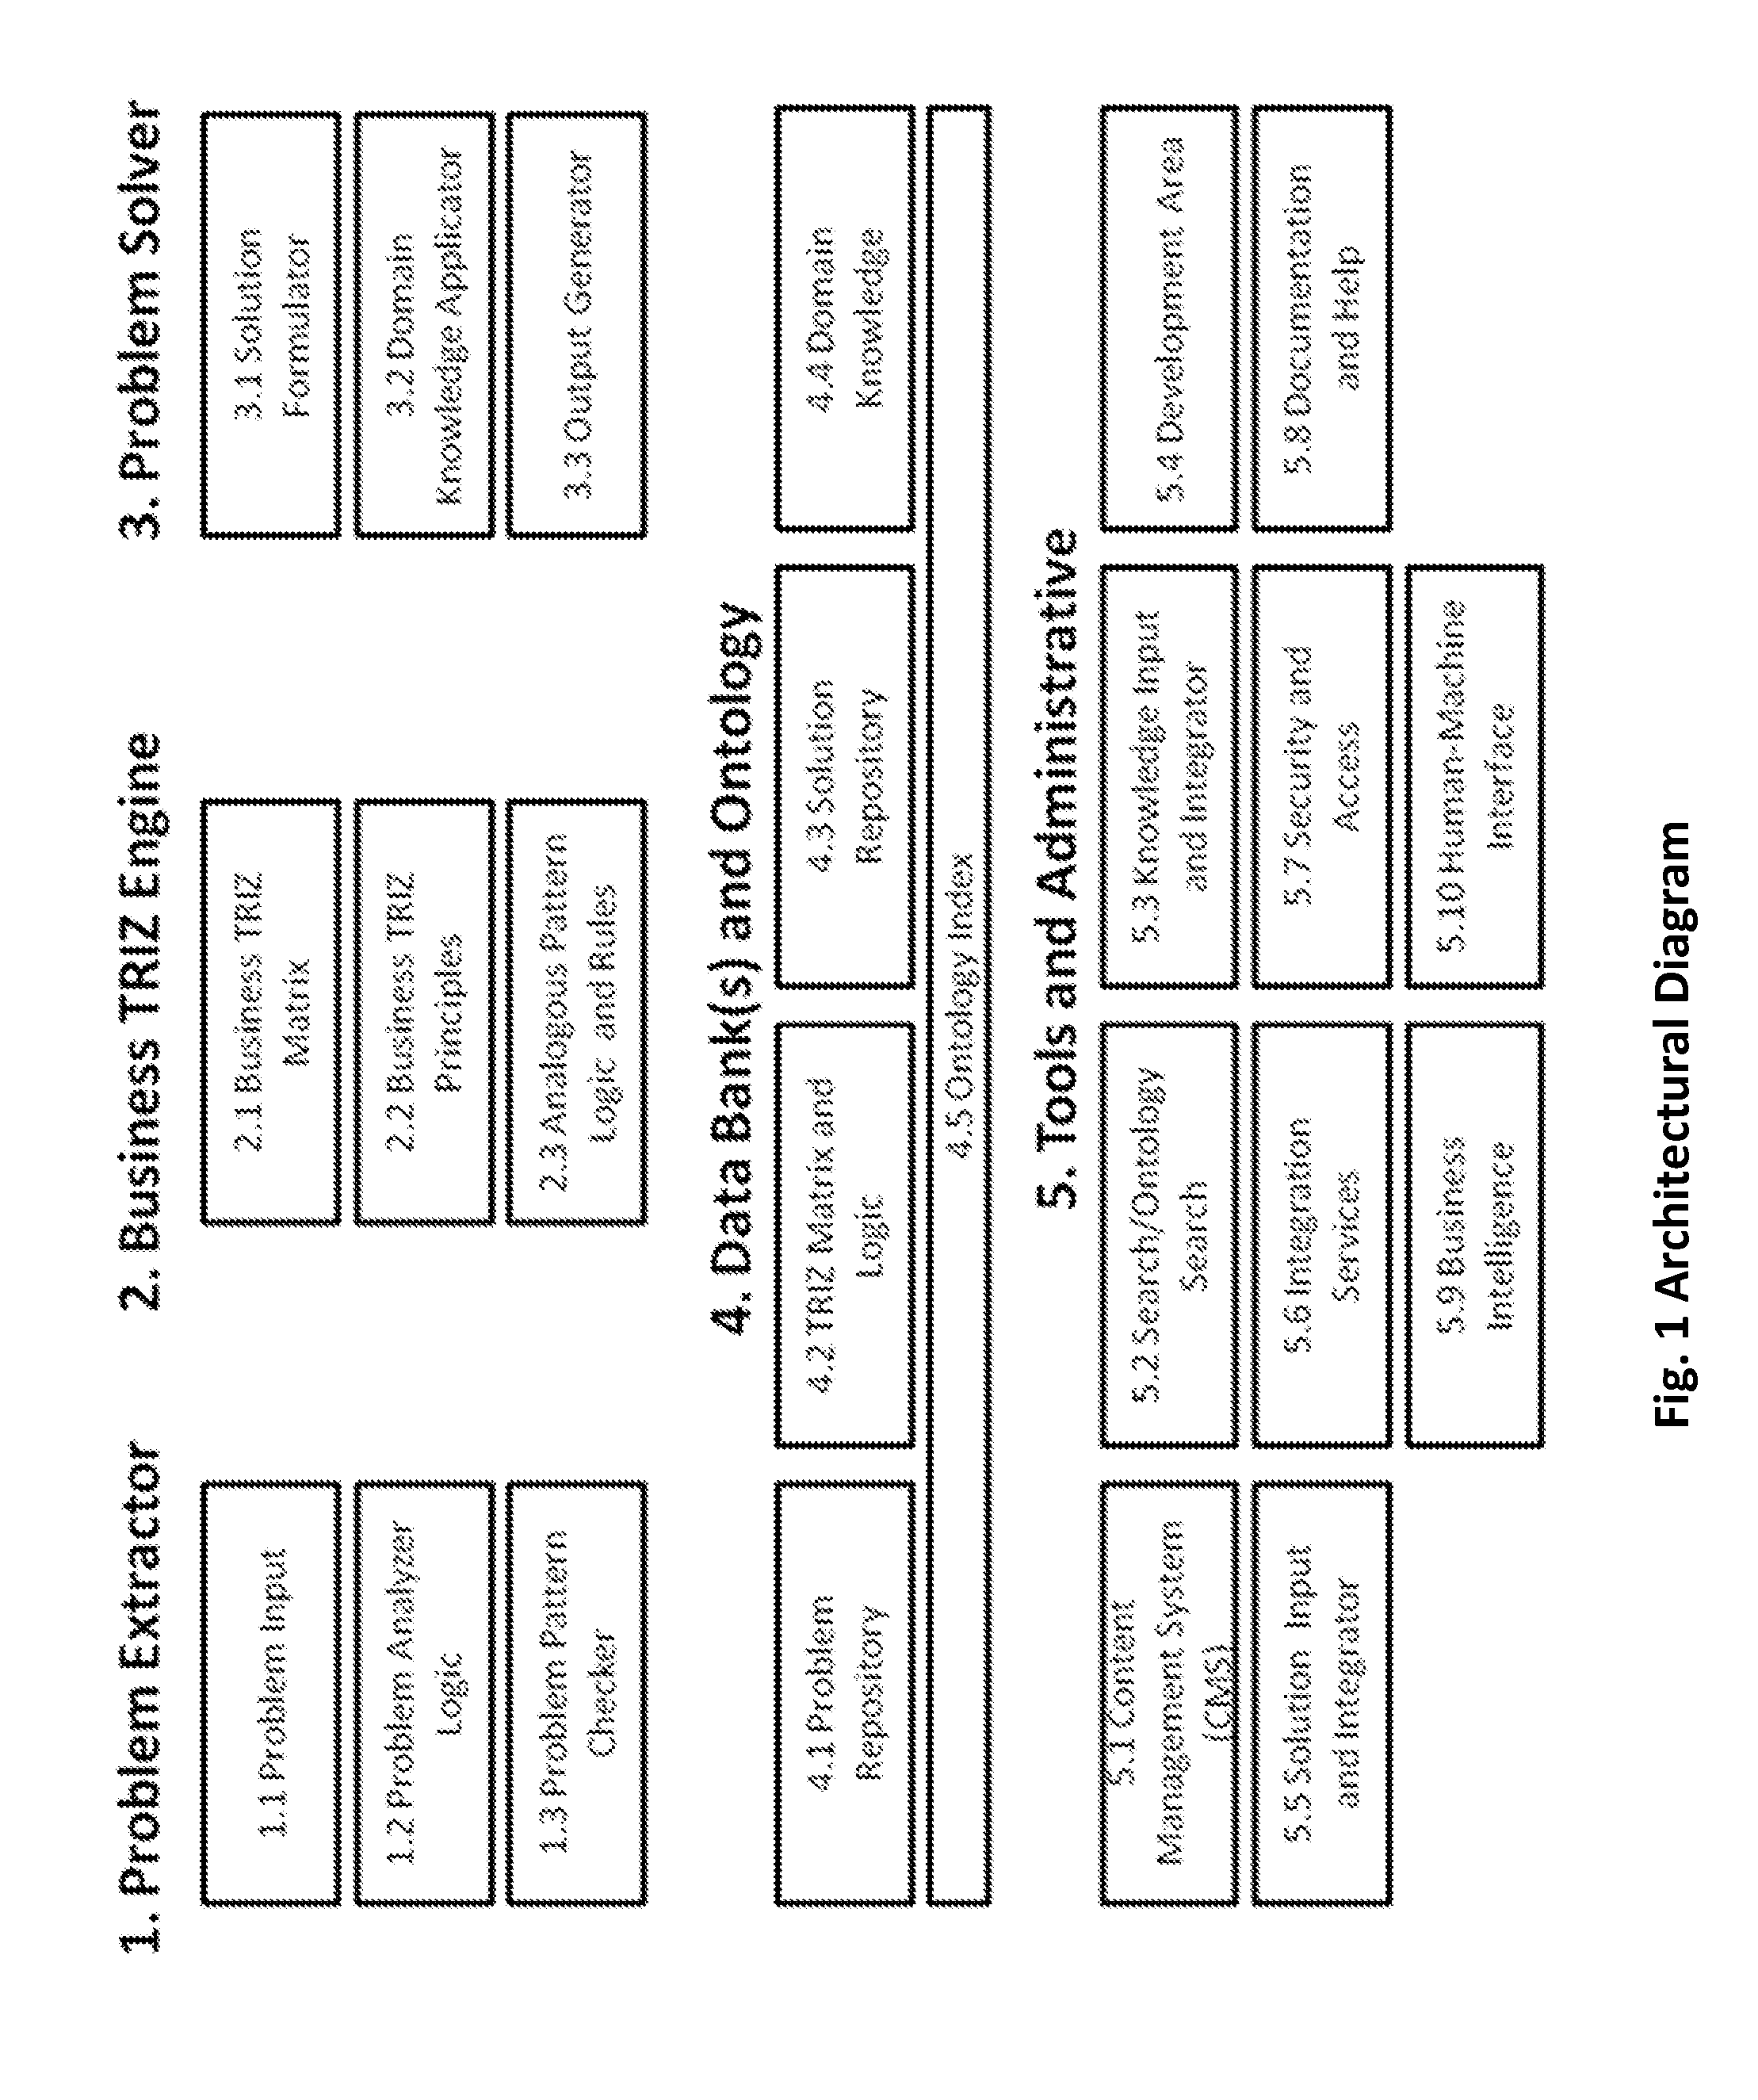 Business triz problem extractor and solver system and method